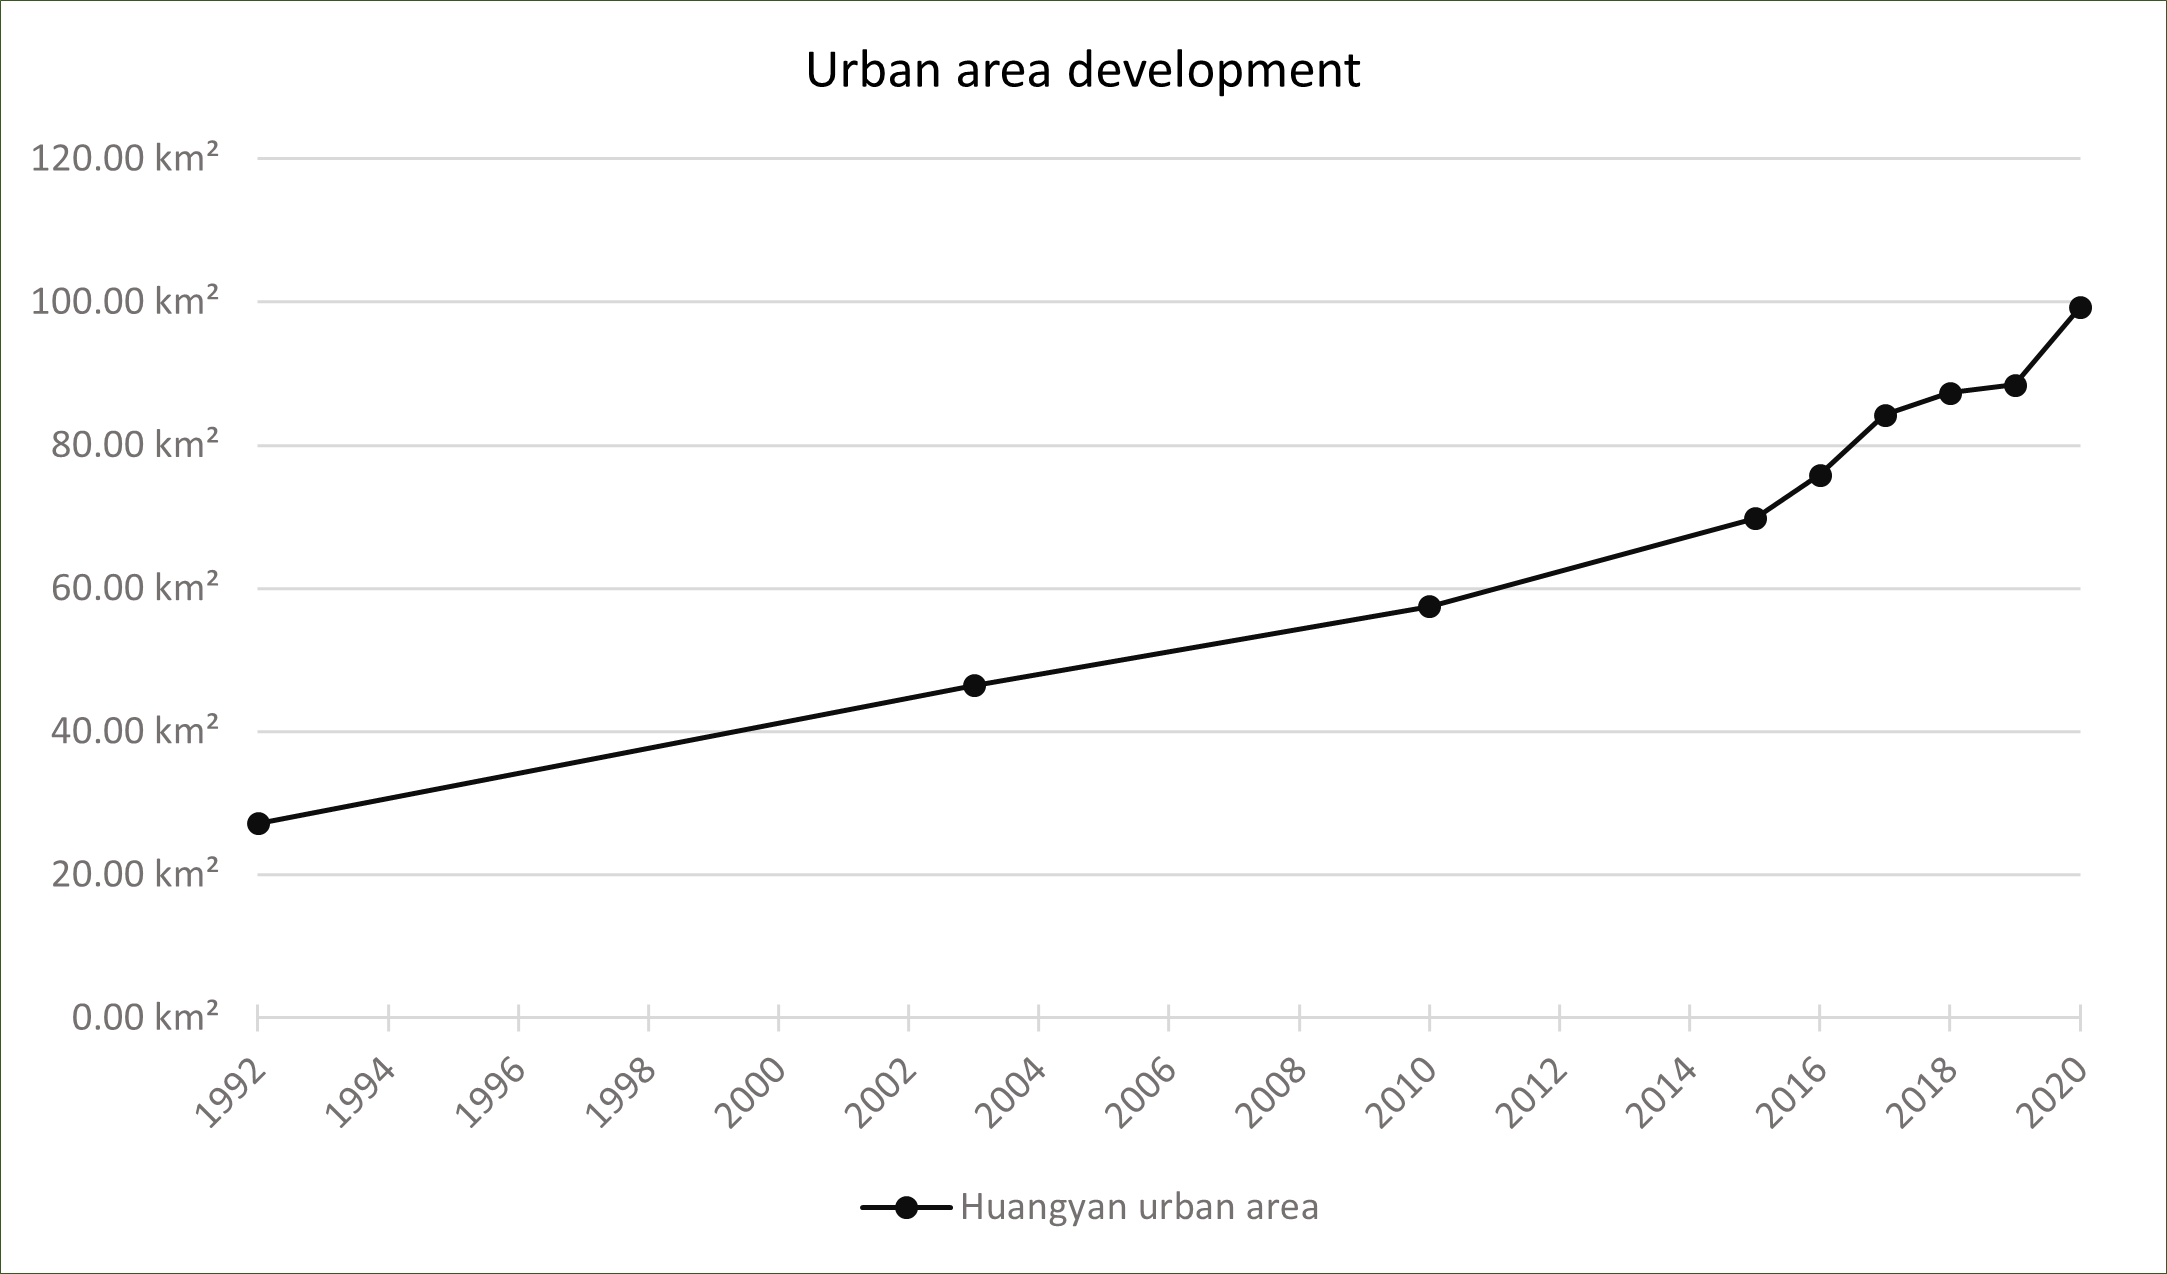 Fig. 5 Urban area development in Huangyan in the period 1992-2020 (Modified from: Xiao et al., 2022) 